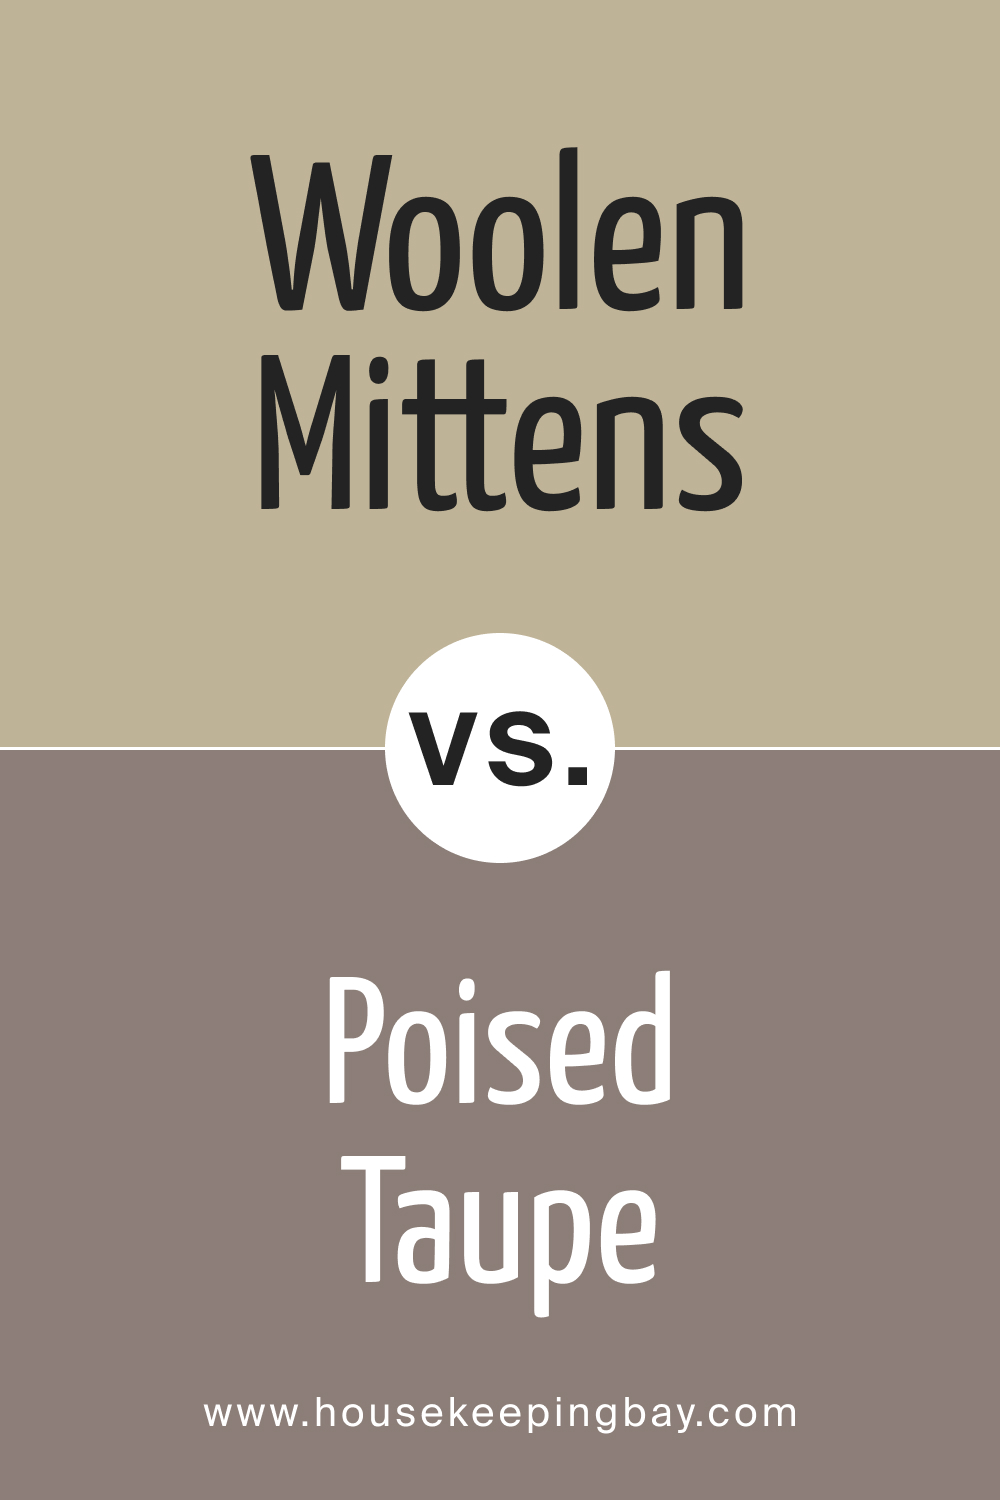 SW 9526 Woolen Mittens vs. SW 6039 Poised Taupe